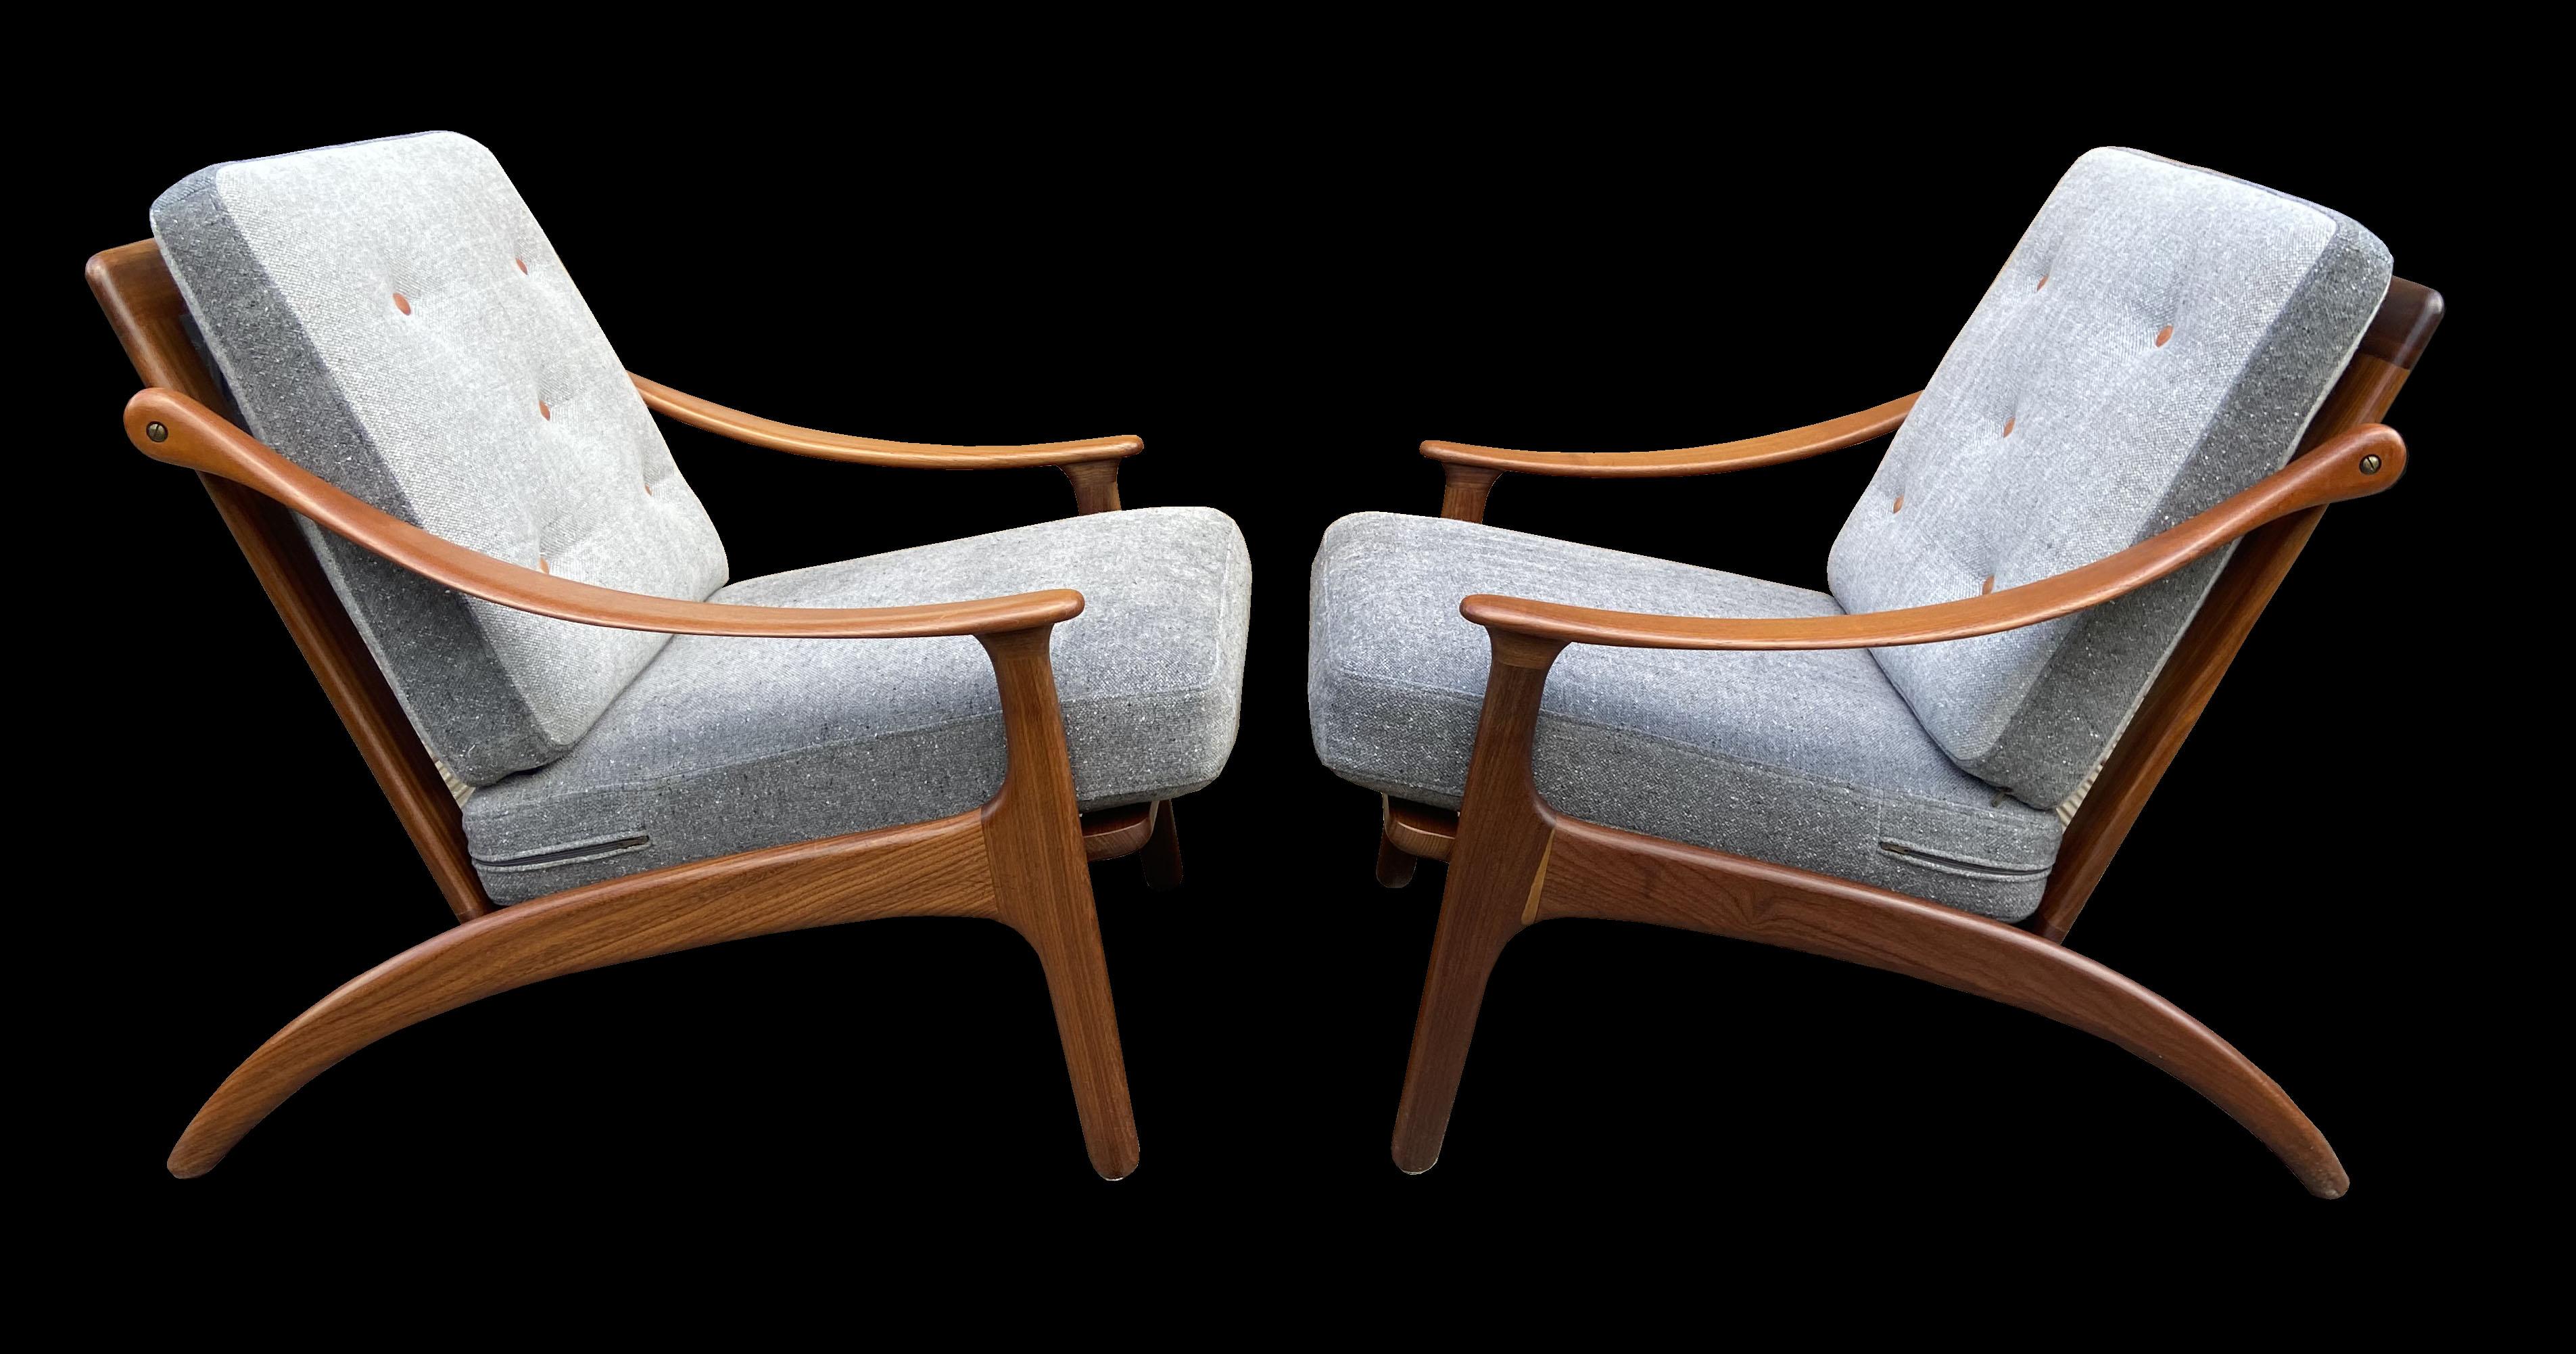 These are lovely examples of this cool design by Arne Hovmand Olsen and produced by P.Mikkelsen in Denmark 1957.
Made of solid teak and upholstered in grey wool.